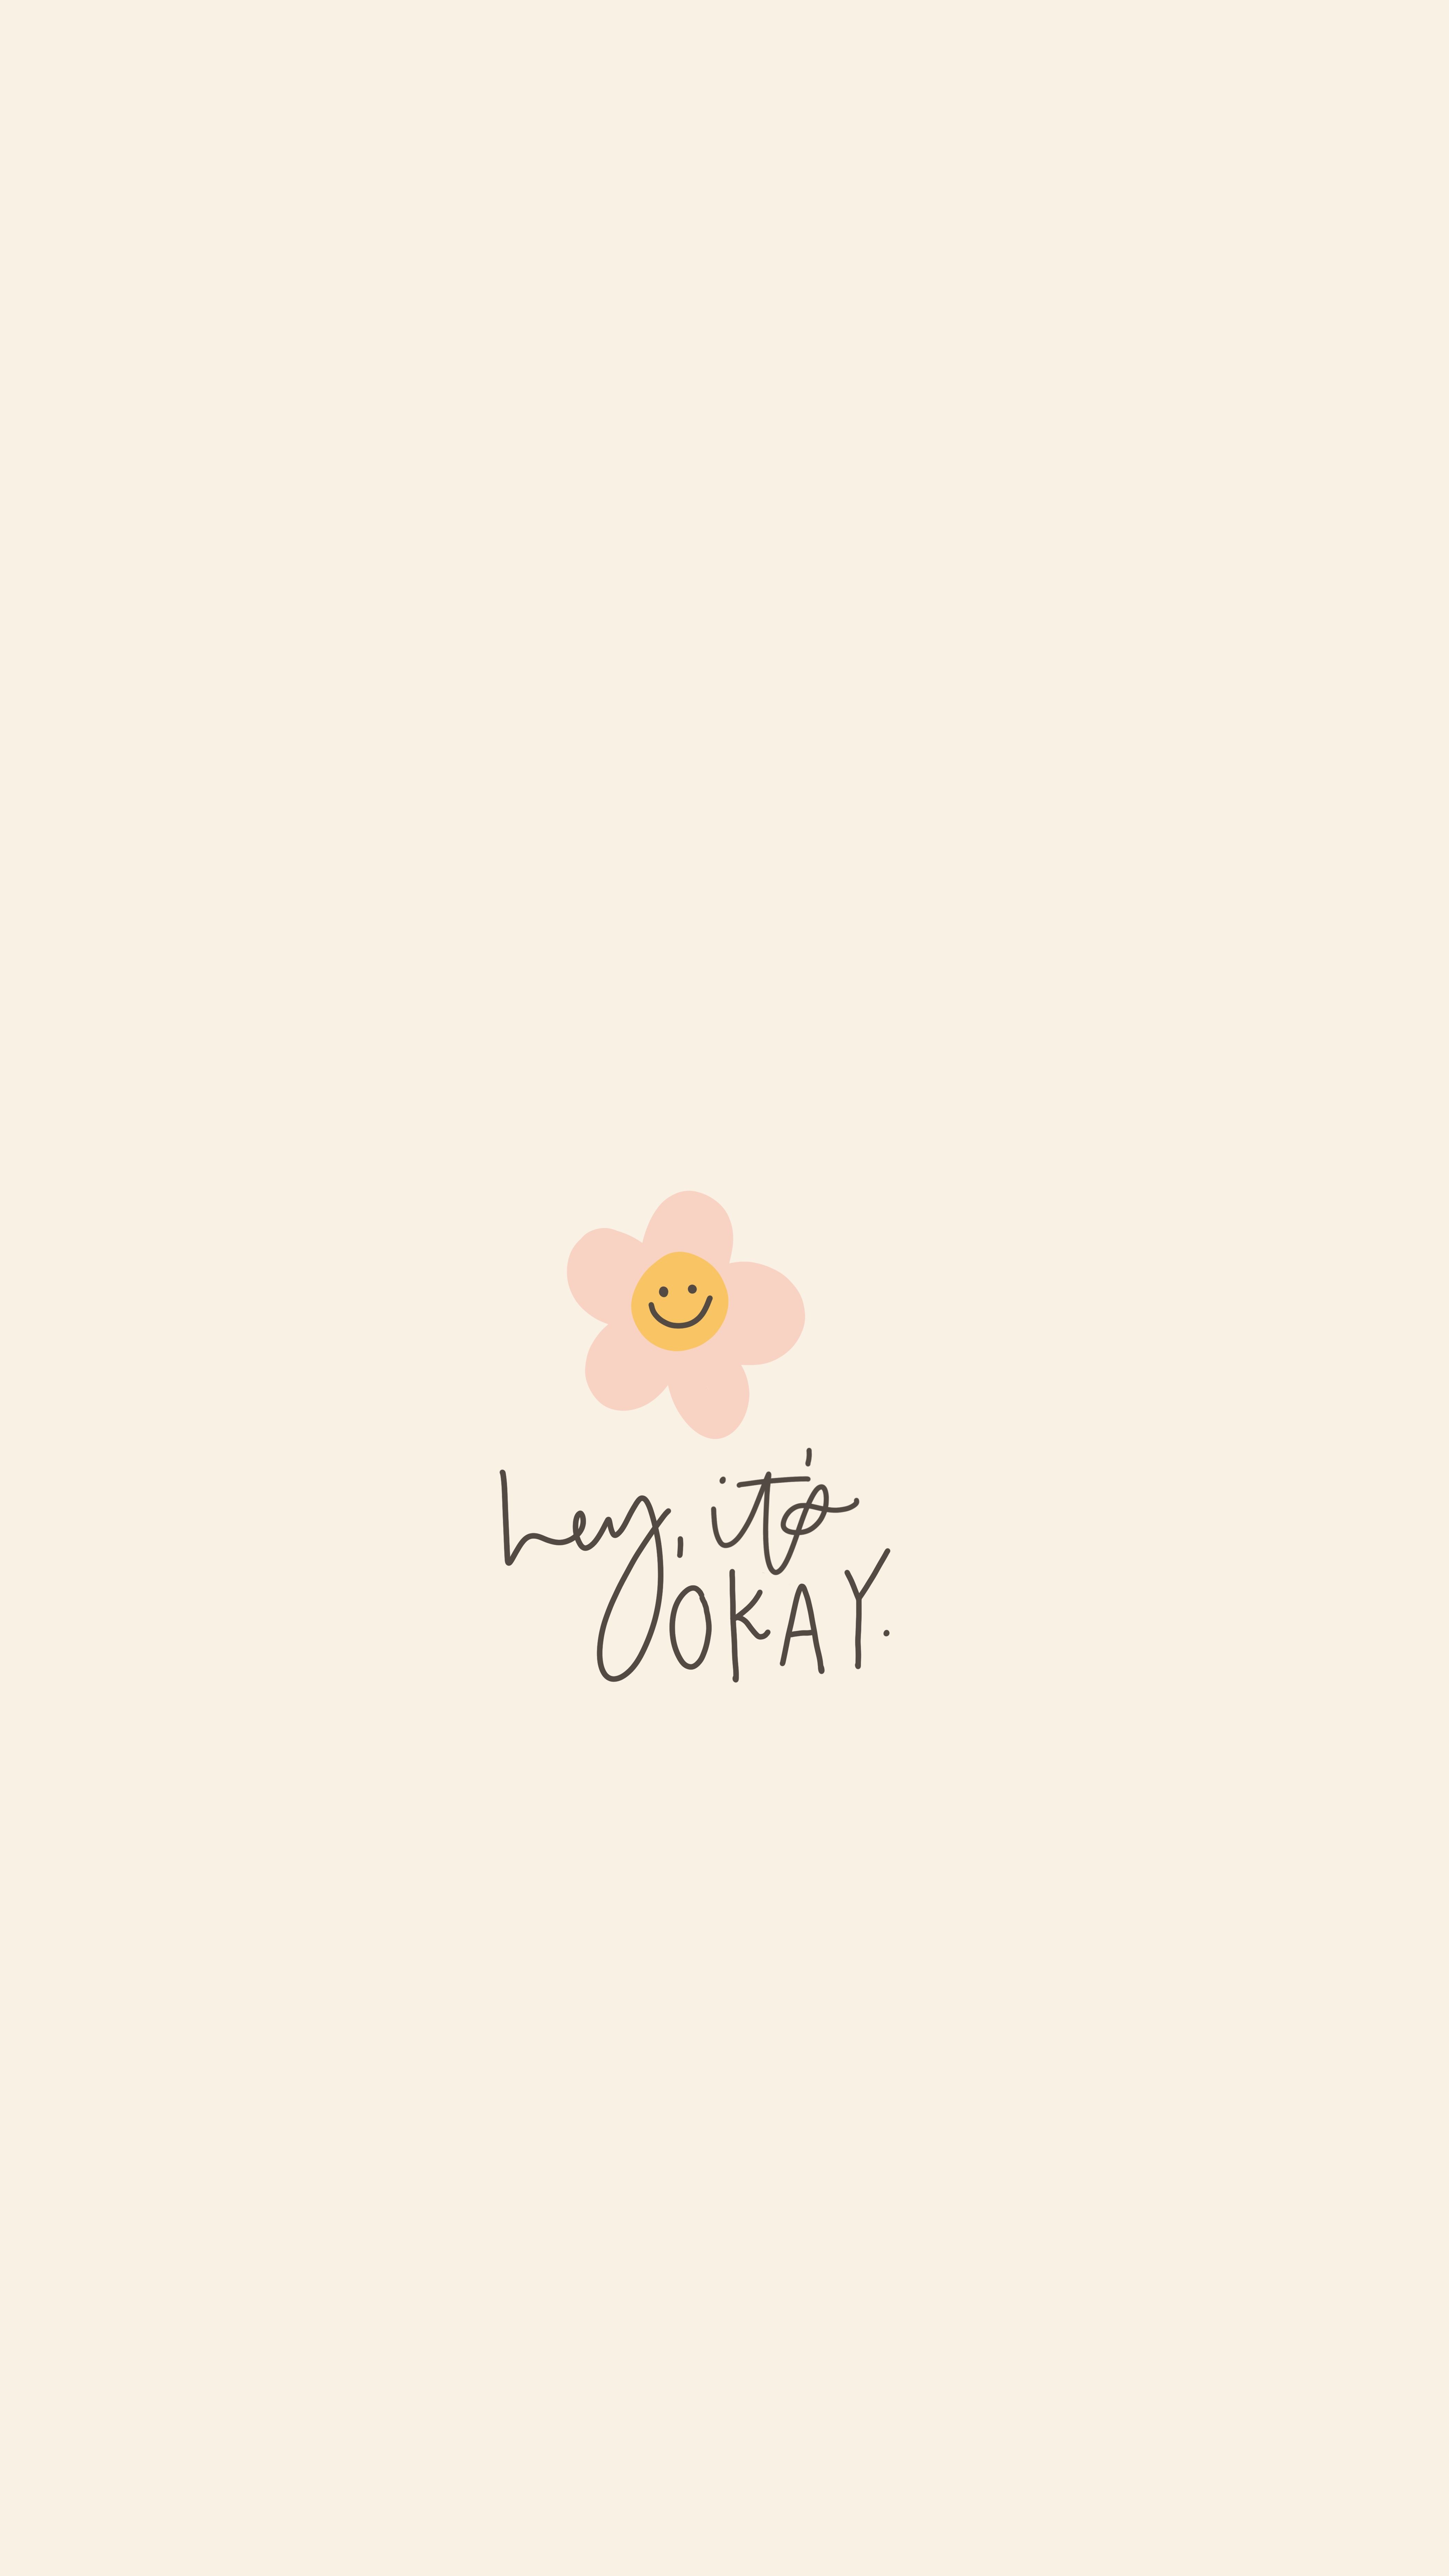 My May Flowers drawing series. Inspirational quote, hey, it's okay. with a smiley face fl. iPad wallpaper quotes, Wallpaper quotes, Aesthetic iphone wallpaper